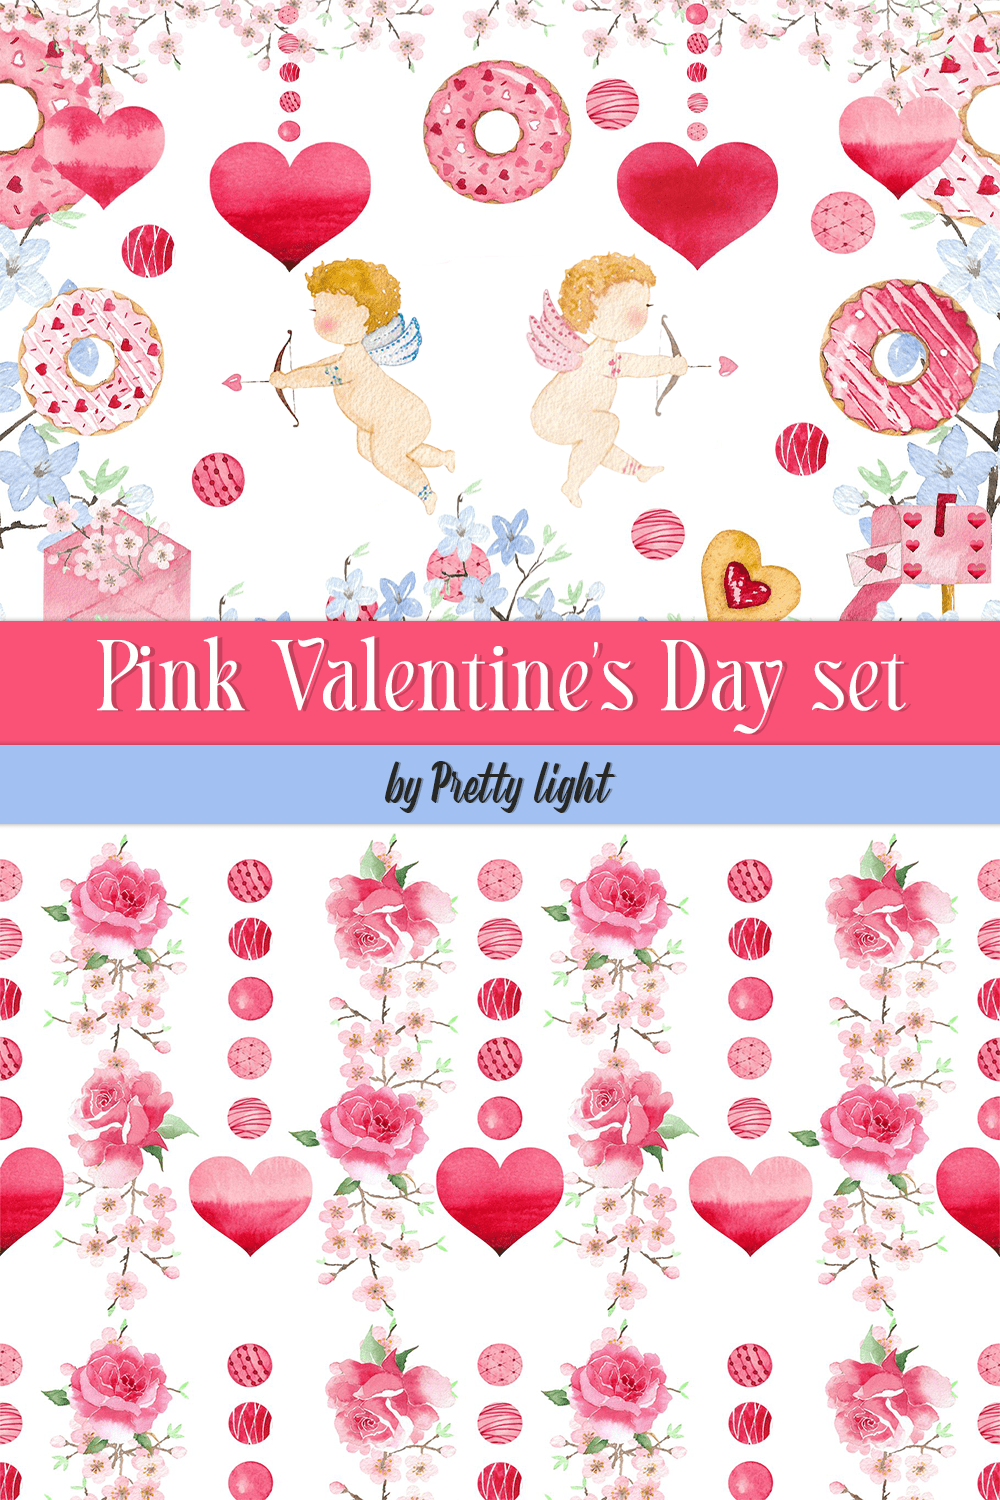 Pink Valentine's Day Set - pinterest image preview.